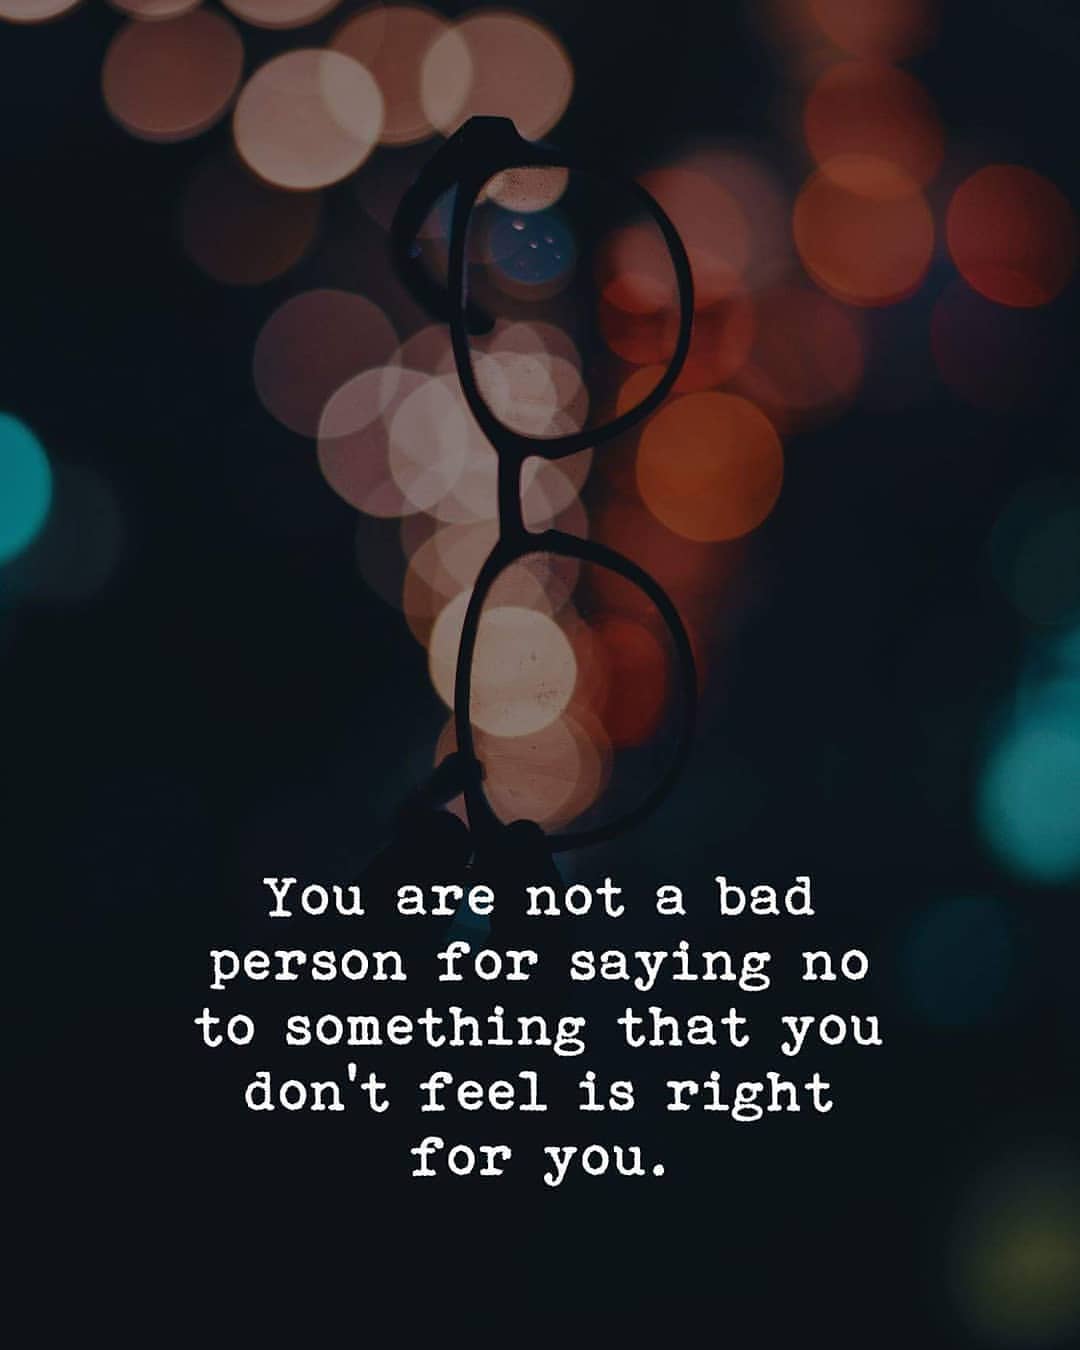 You are not a bad person for saying no to something that you don't feel is right for you